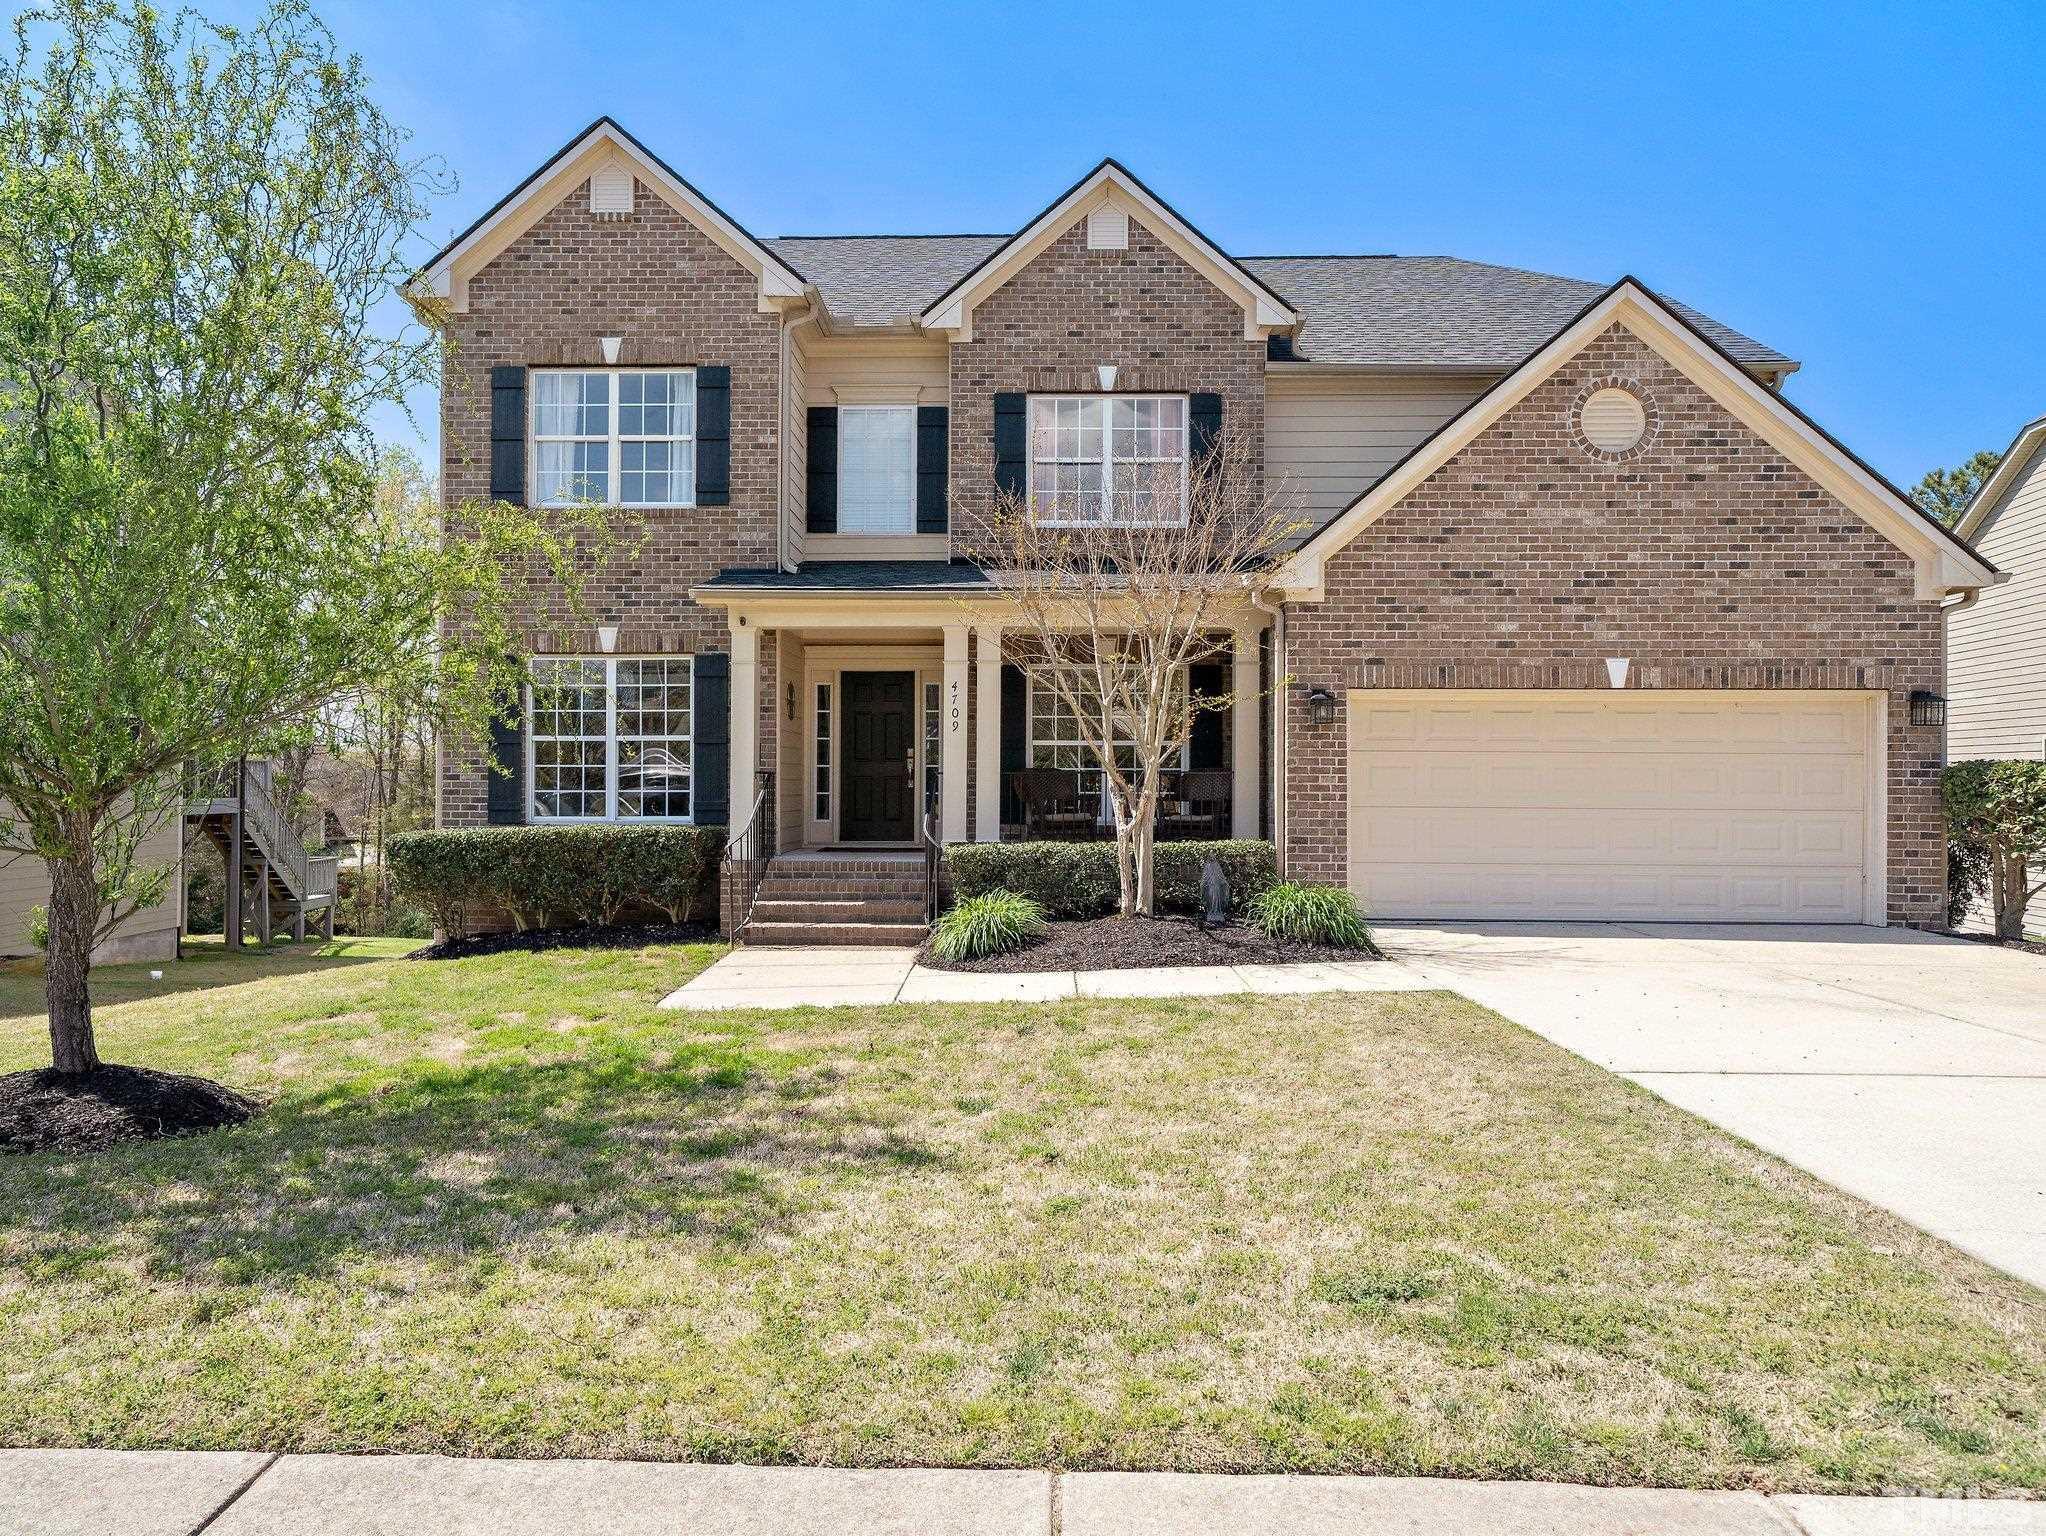 4709 Capefield Drive, 2502796, Wake Forest, Detached,  sold, Realty World - Triangle Living